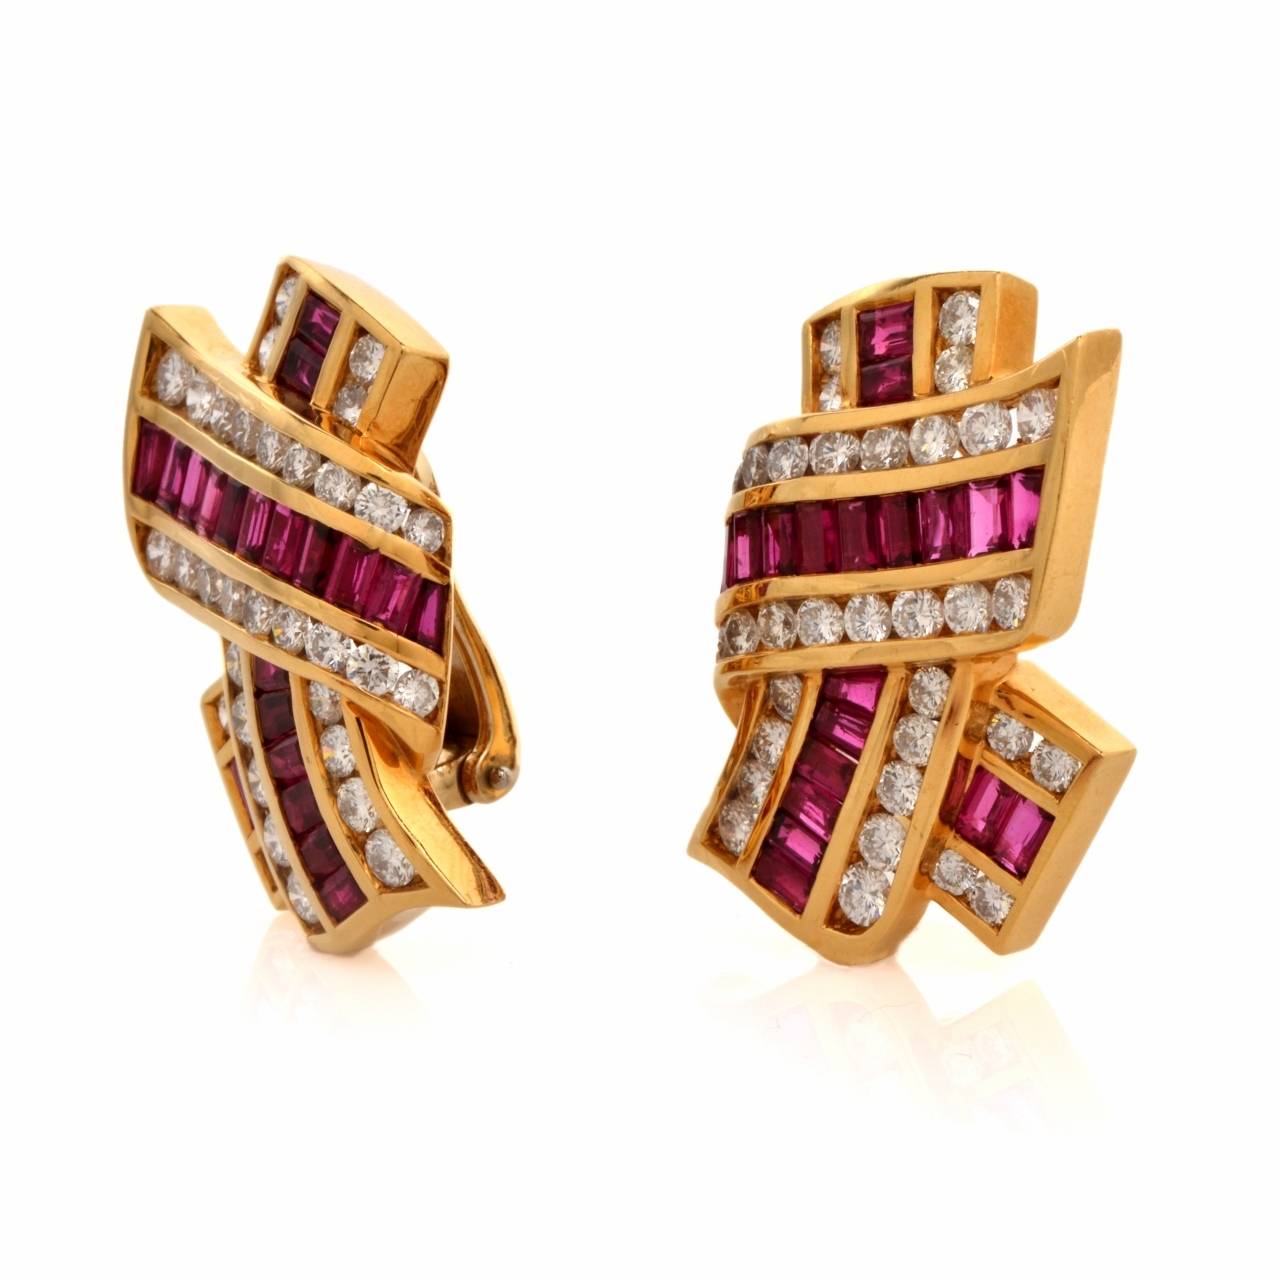 These Charls Krypell earrings with baguette rubies and round-faceted diamonds are crafted in 18K yellow gold. They Designed as a crescent-shaped profile wrapped by a scrolled ribbon, these alluring earrings are resplendent in approx. 7.35 carats of